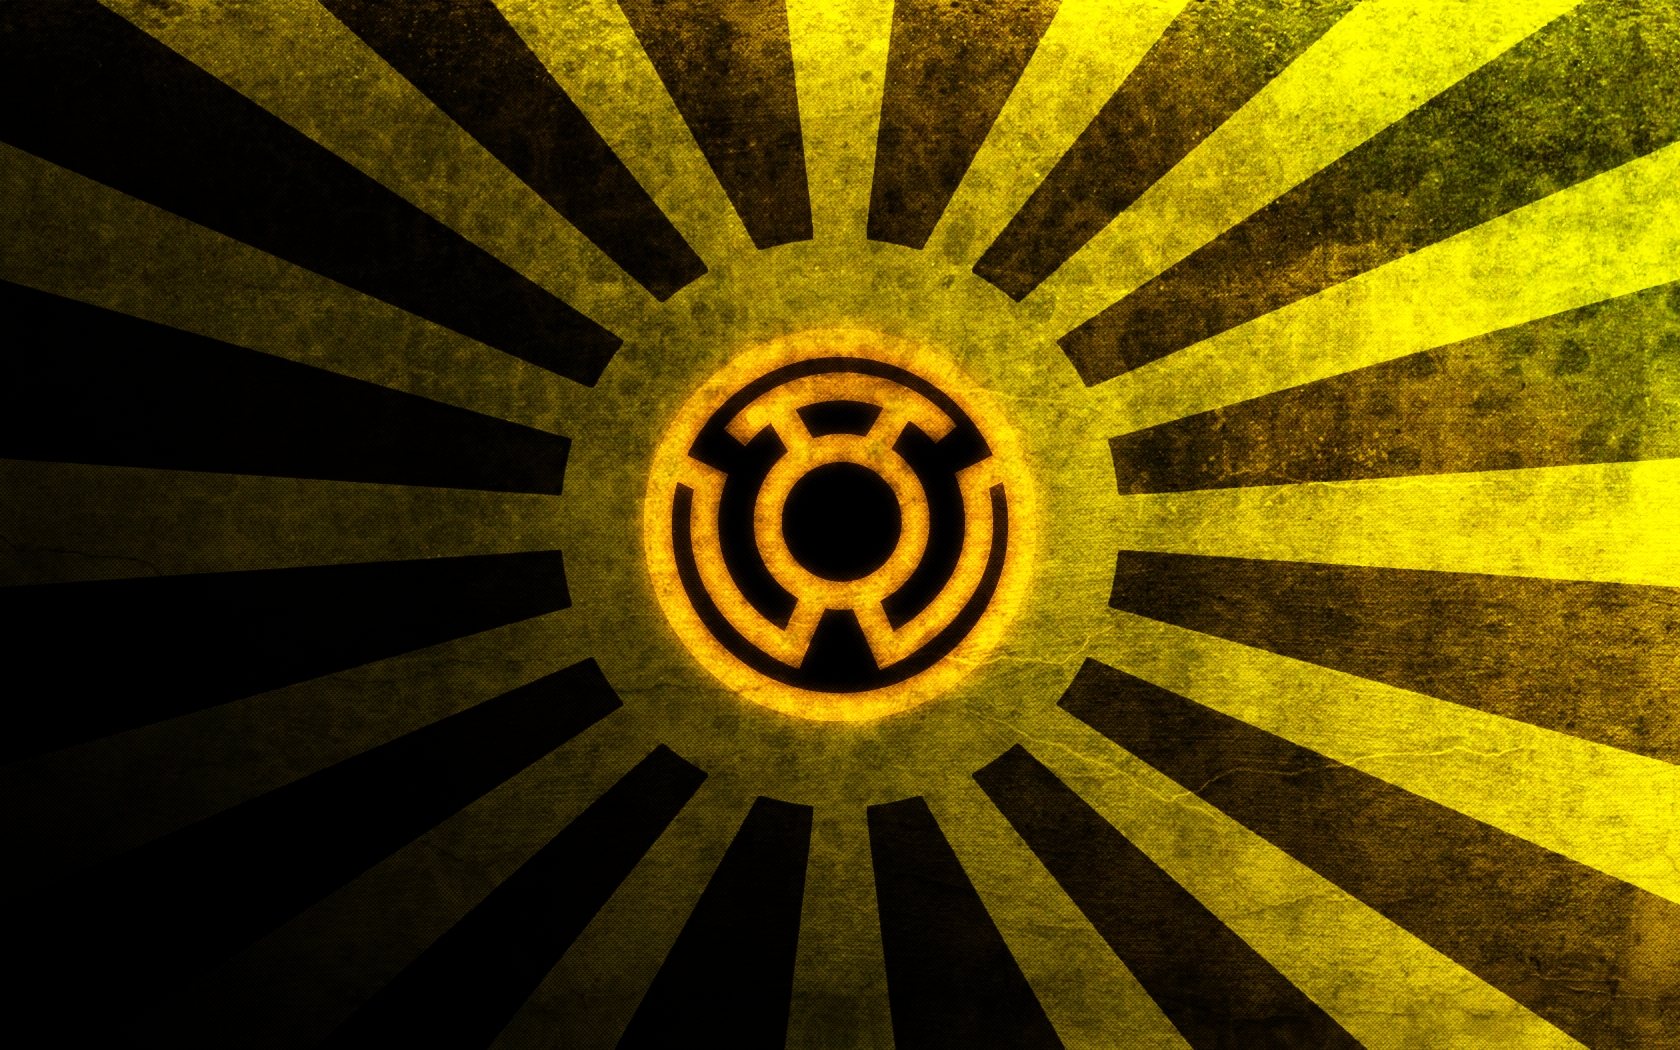 Sinestro Corps Wallpaper by LordShenlong on